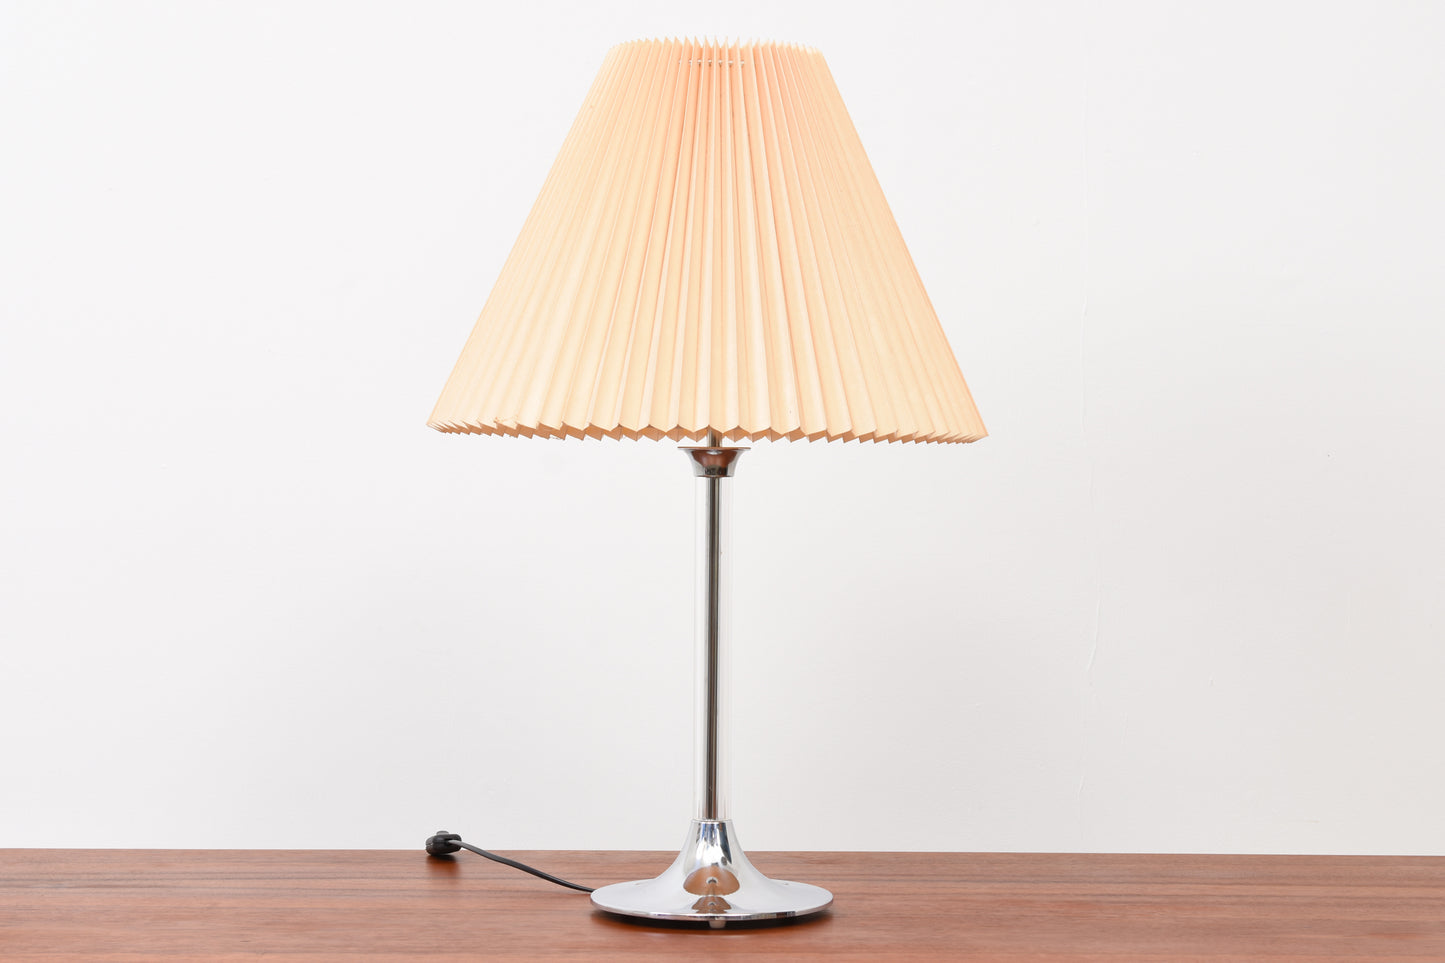 Vintage table lamp by Mads Caprani